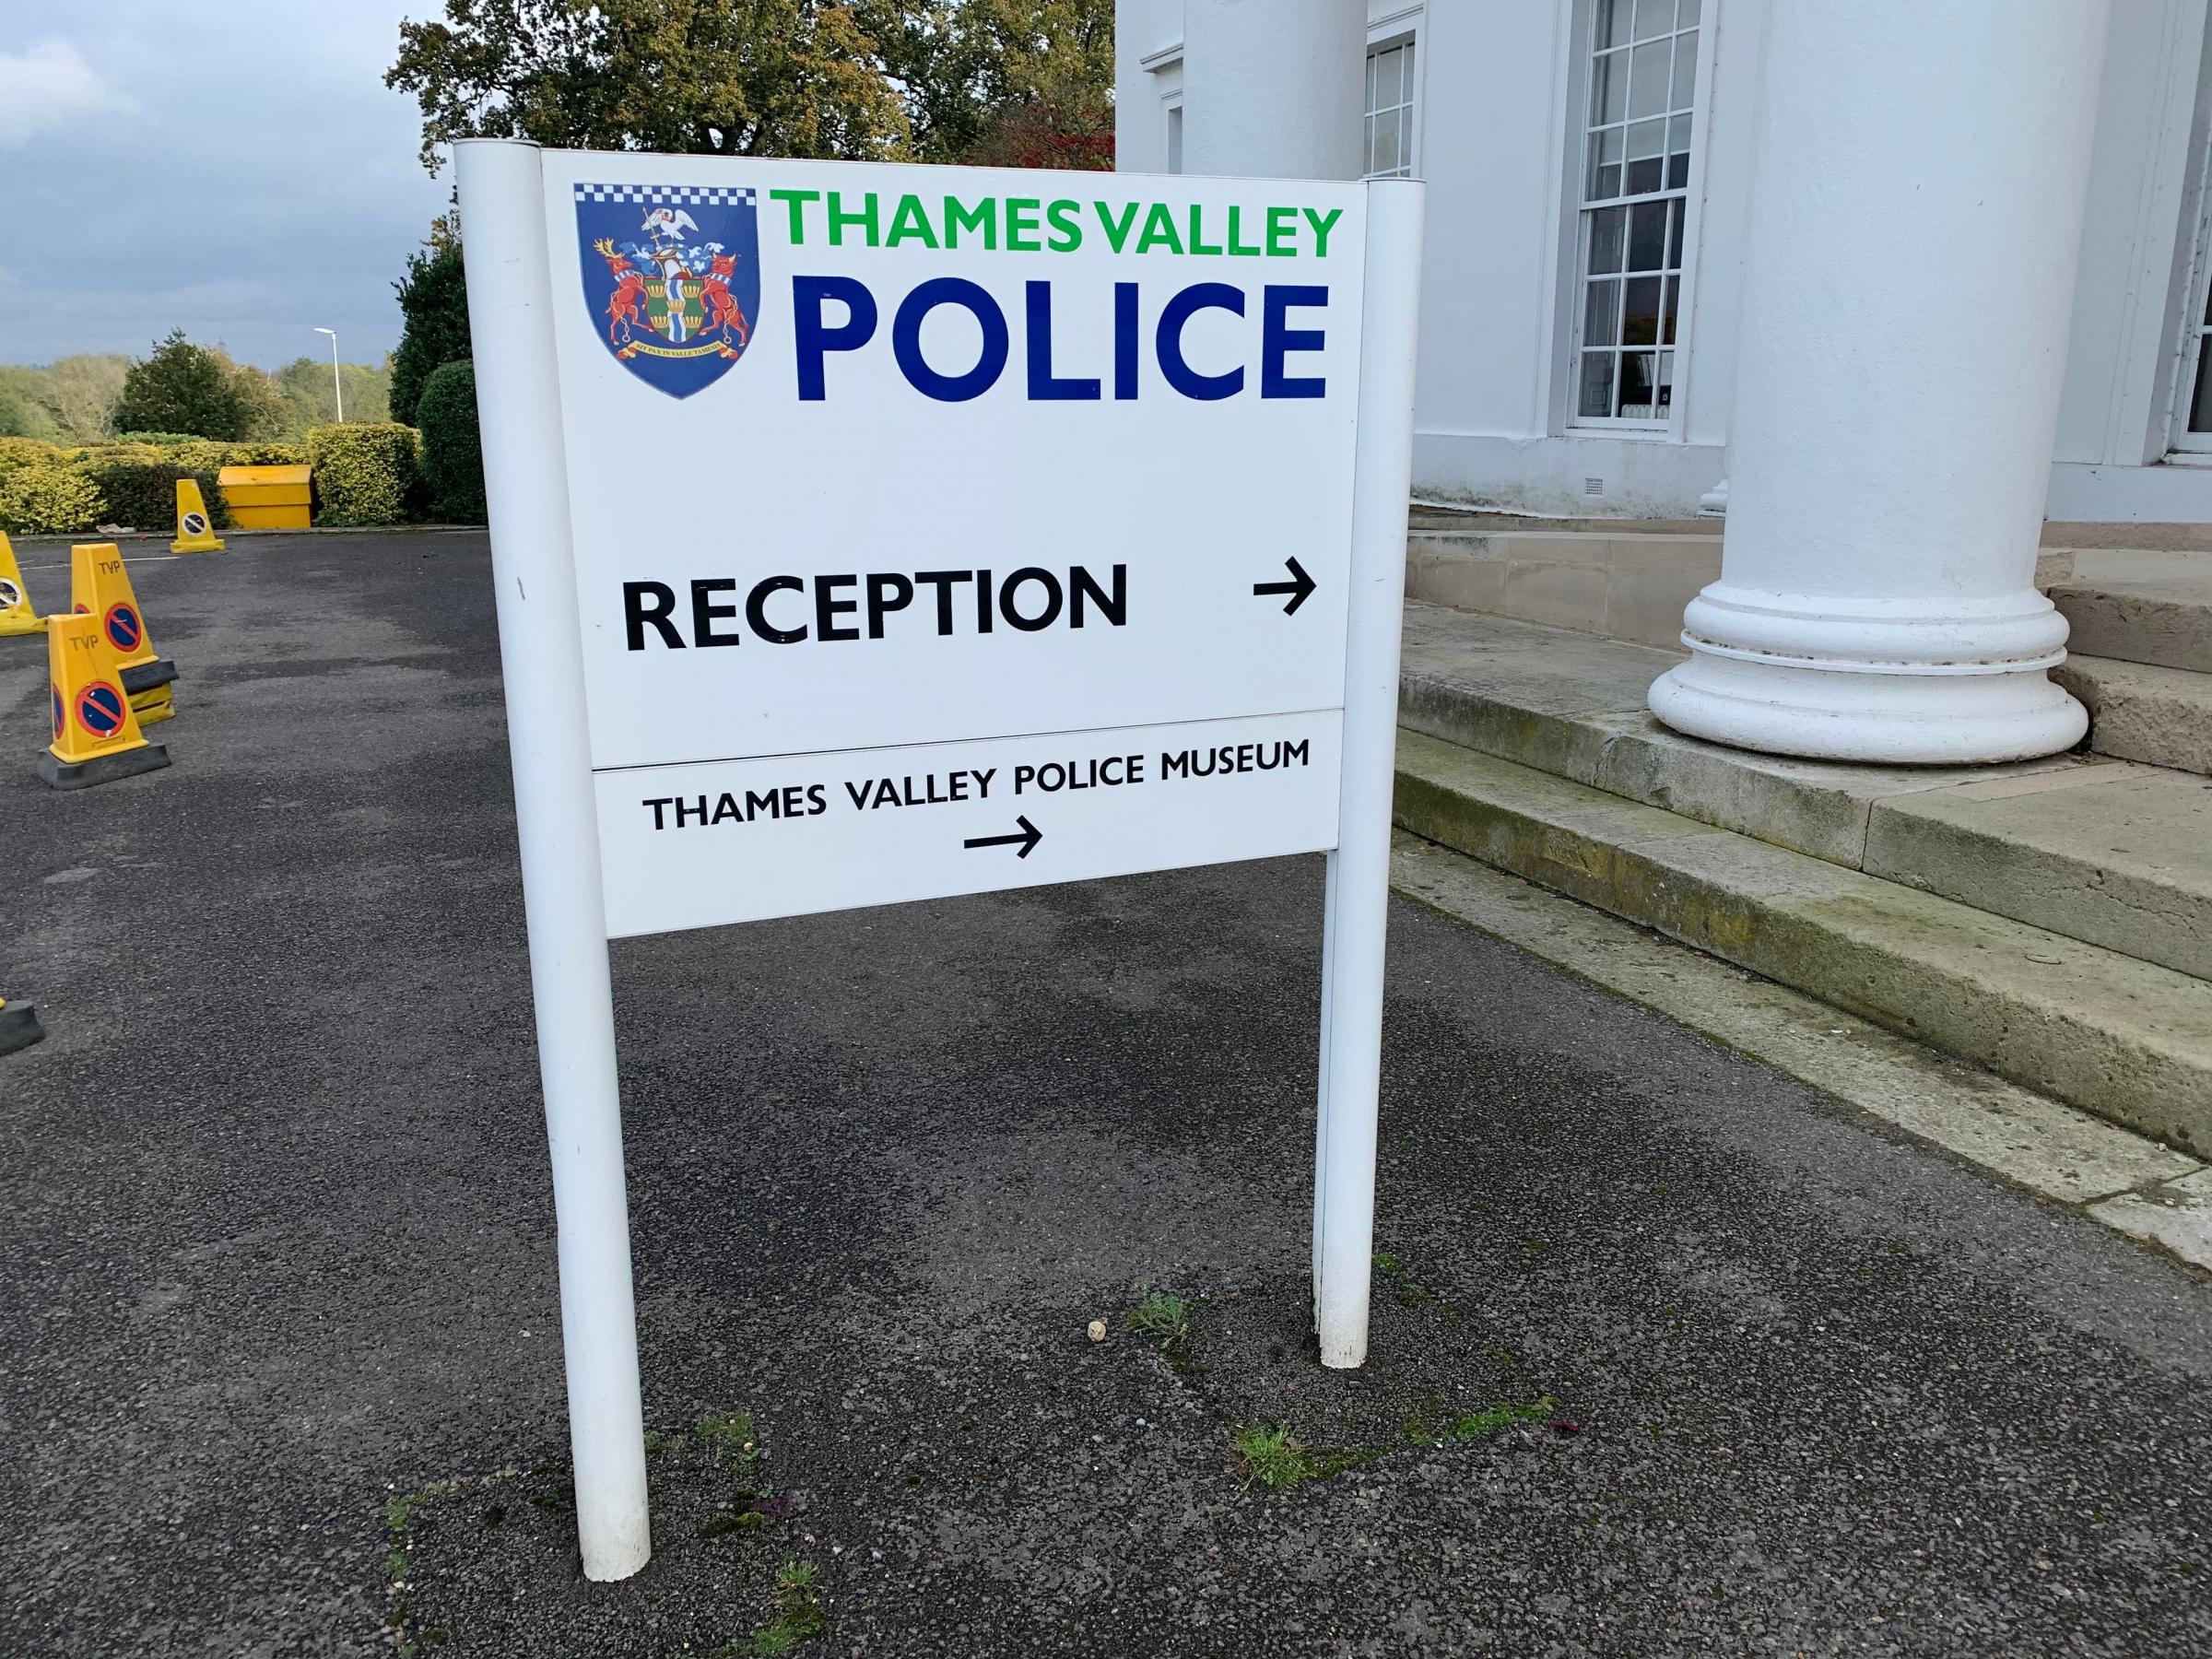 The Thames Valley Police Museum is home to a number of fascinating artefacts